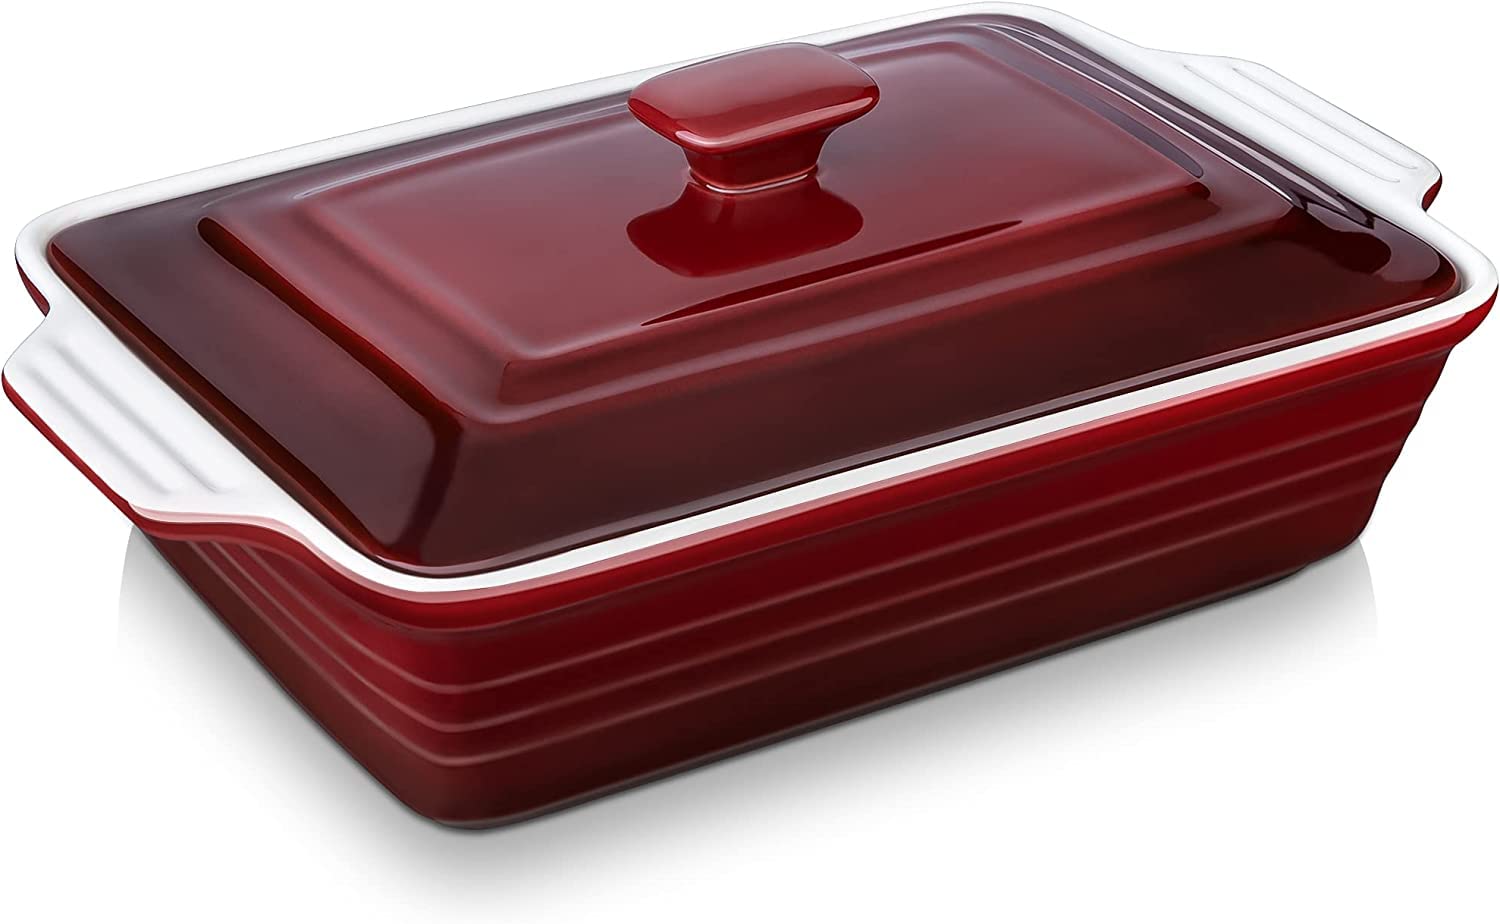 4.5 Quart Nonstick Casserole Dish with Lid, LOVECASA 9 x 13 Inches Lasagna Pan Deep, Ceramic Baking Dish for Dinner, Banquet, and Party, Gradient Red